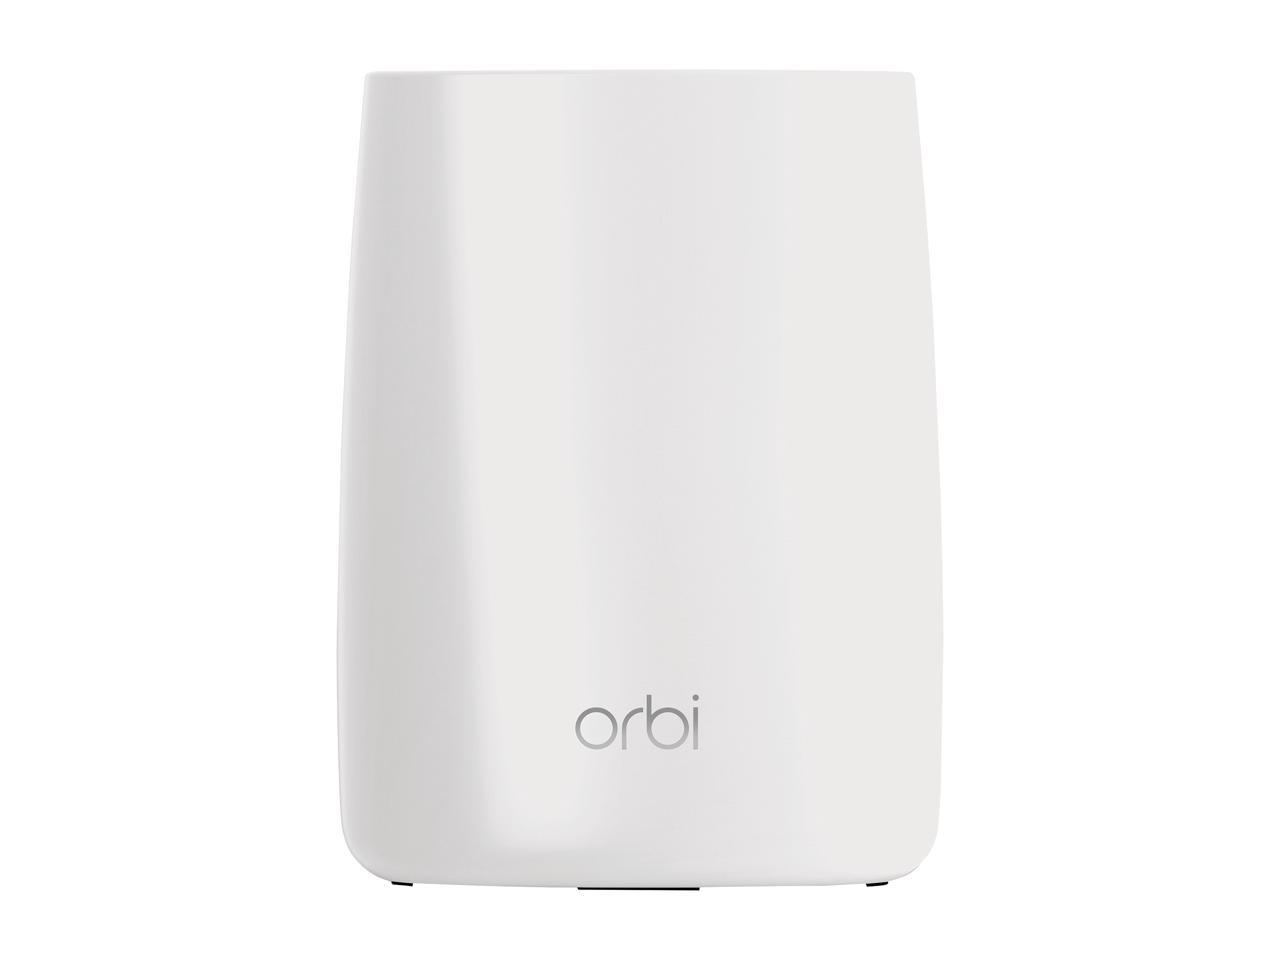 NETGEAR Orbi Whole Home Mesh WiFi Satellite Extender - Works with your Orbi  Router to Add 2,500 sq.ft., AC3000 (RBS50)